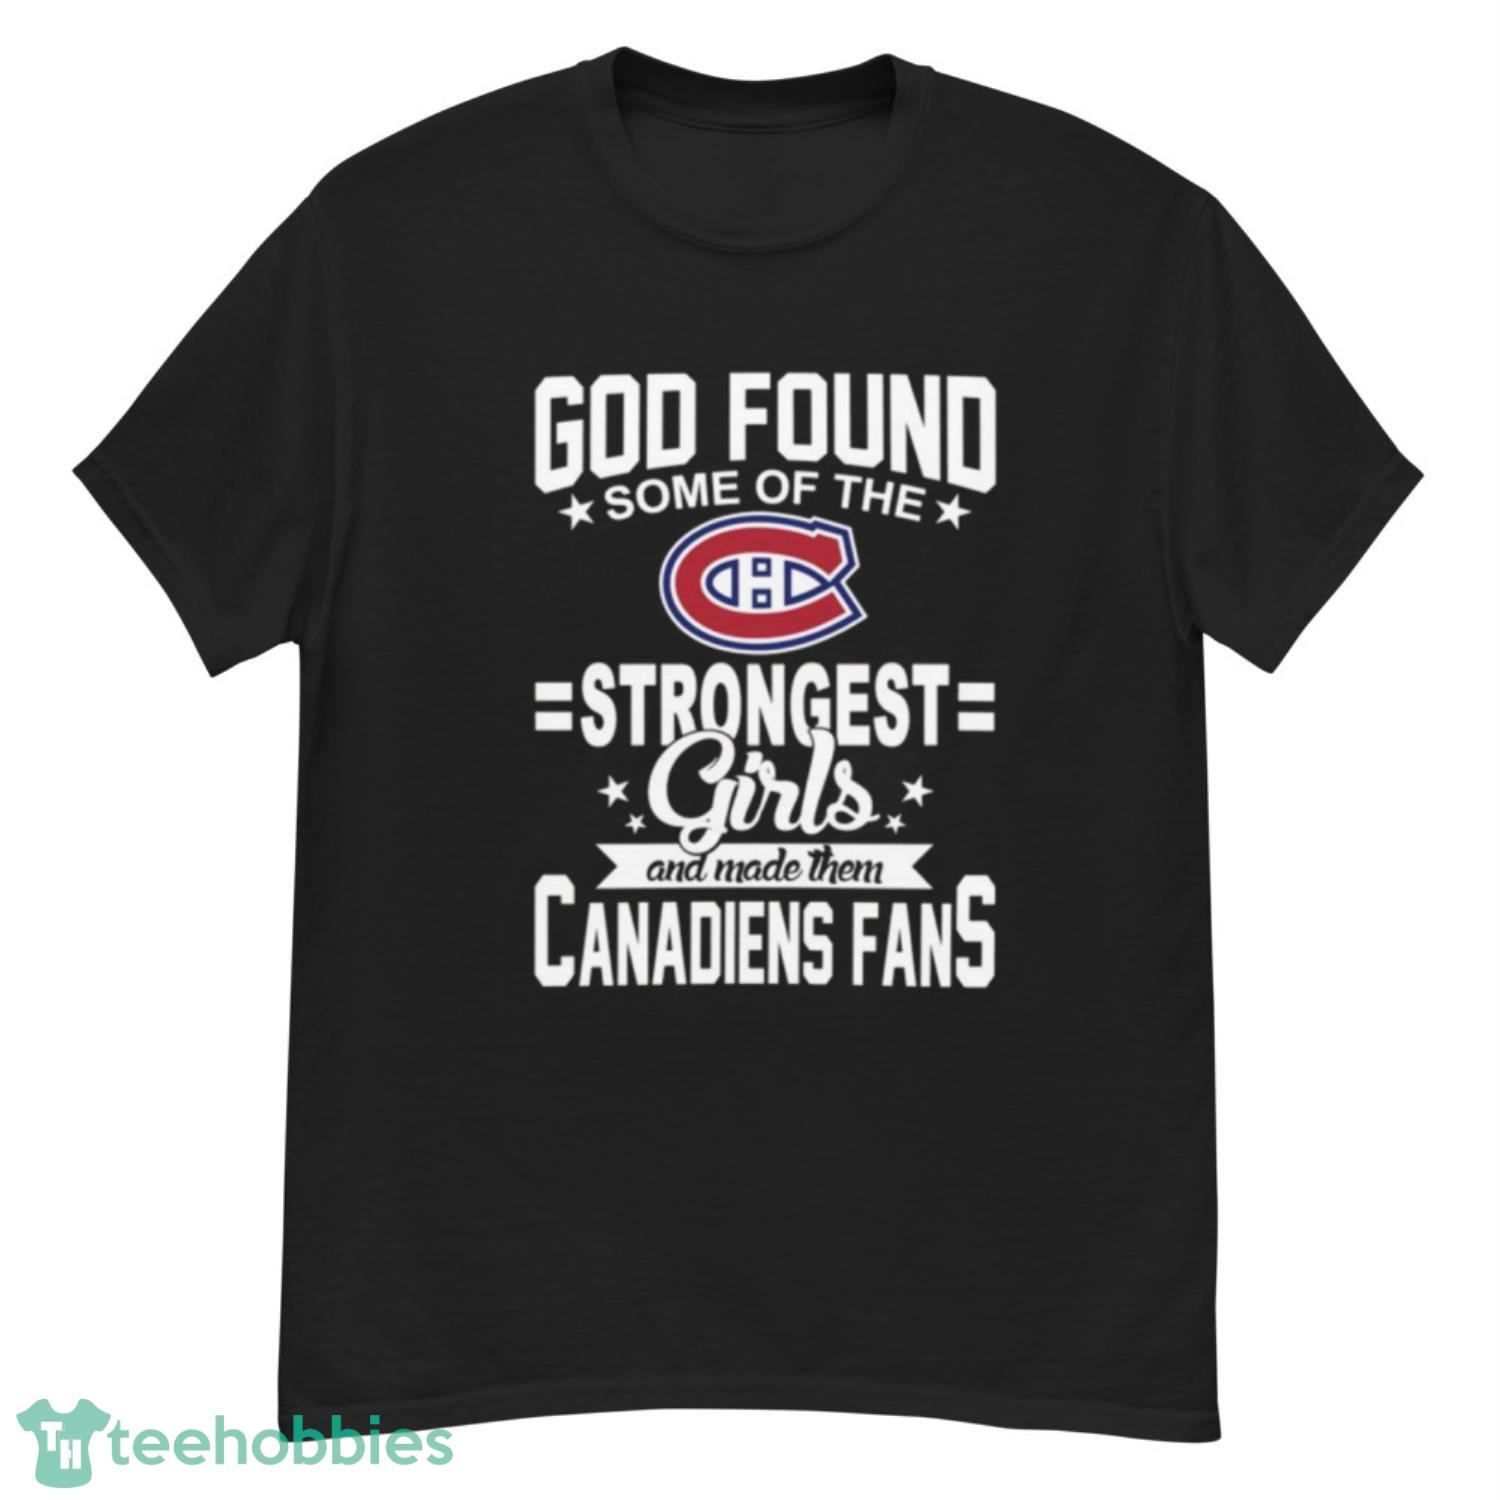 Montreal Canadiens NHL Football God Found Some Of The Strongest Girls Adoring Fans T Shirt - G500 Men’s Classic T-Shirt